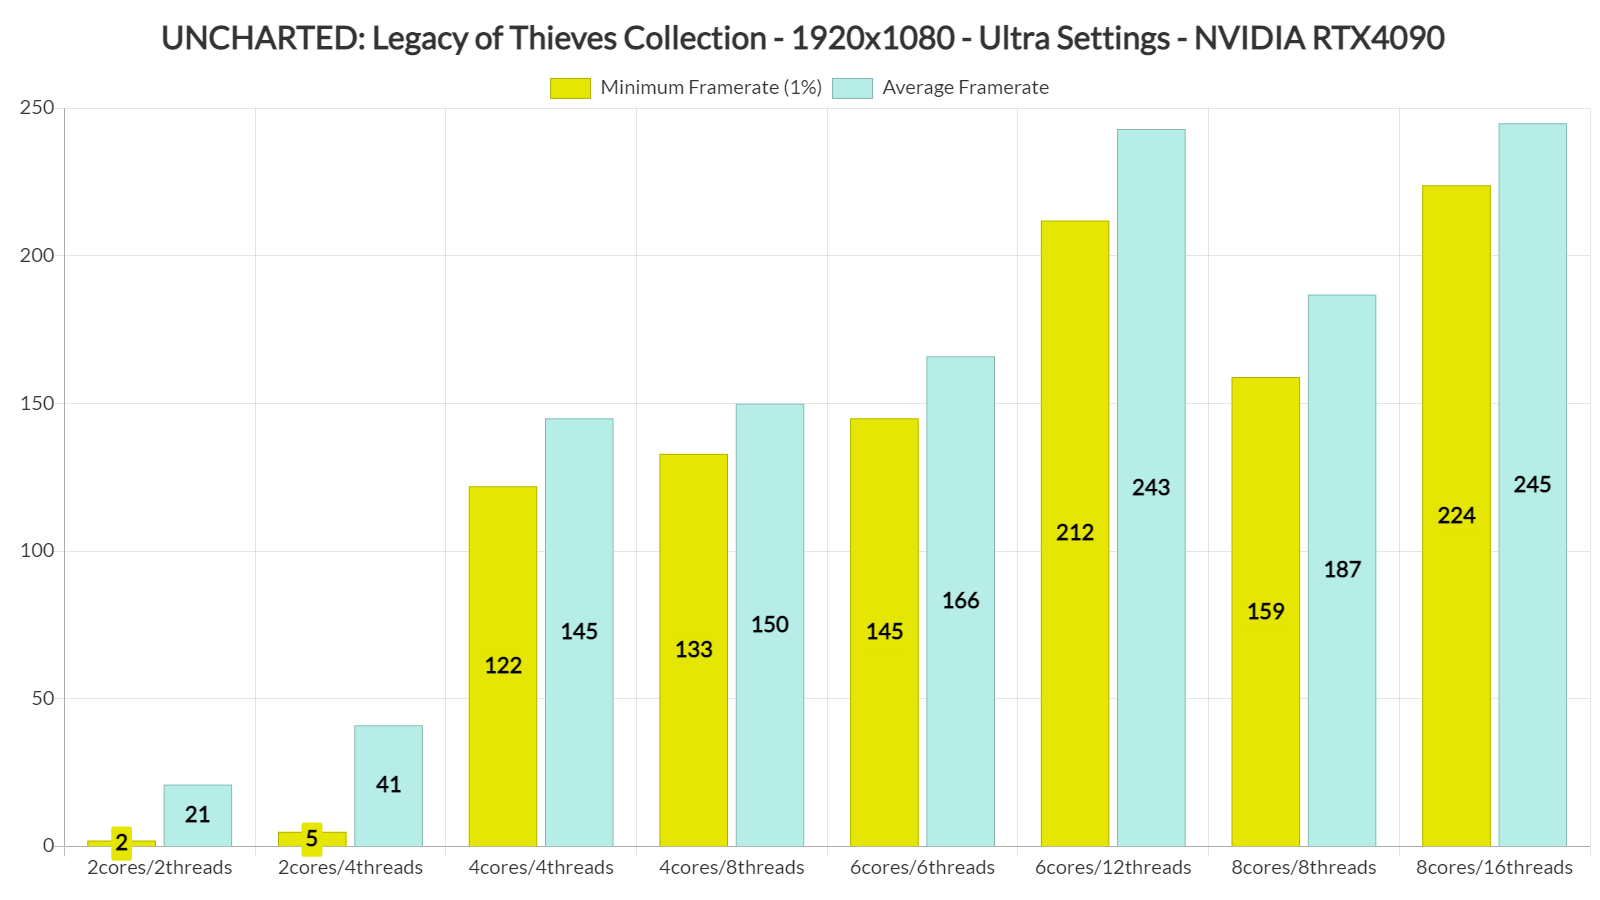 UNCHARTED Legacy of Thieves Collection CPU benchmarks